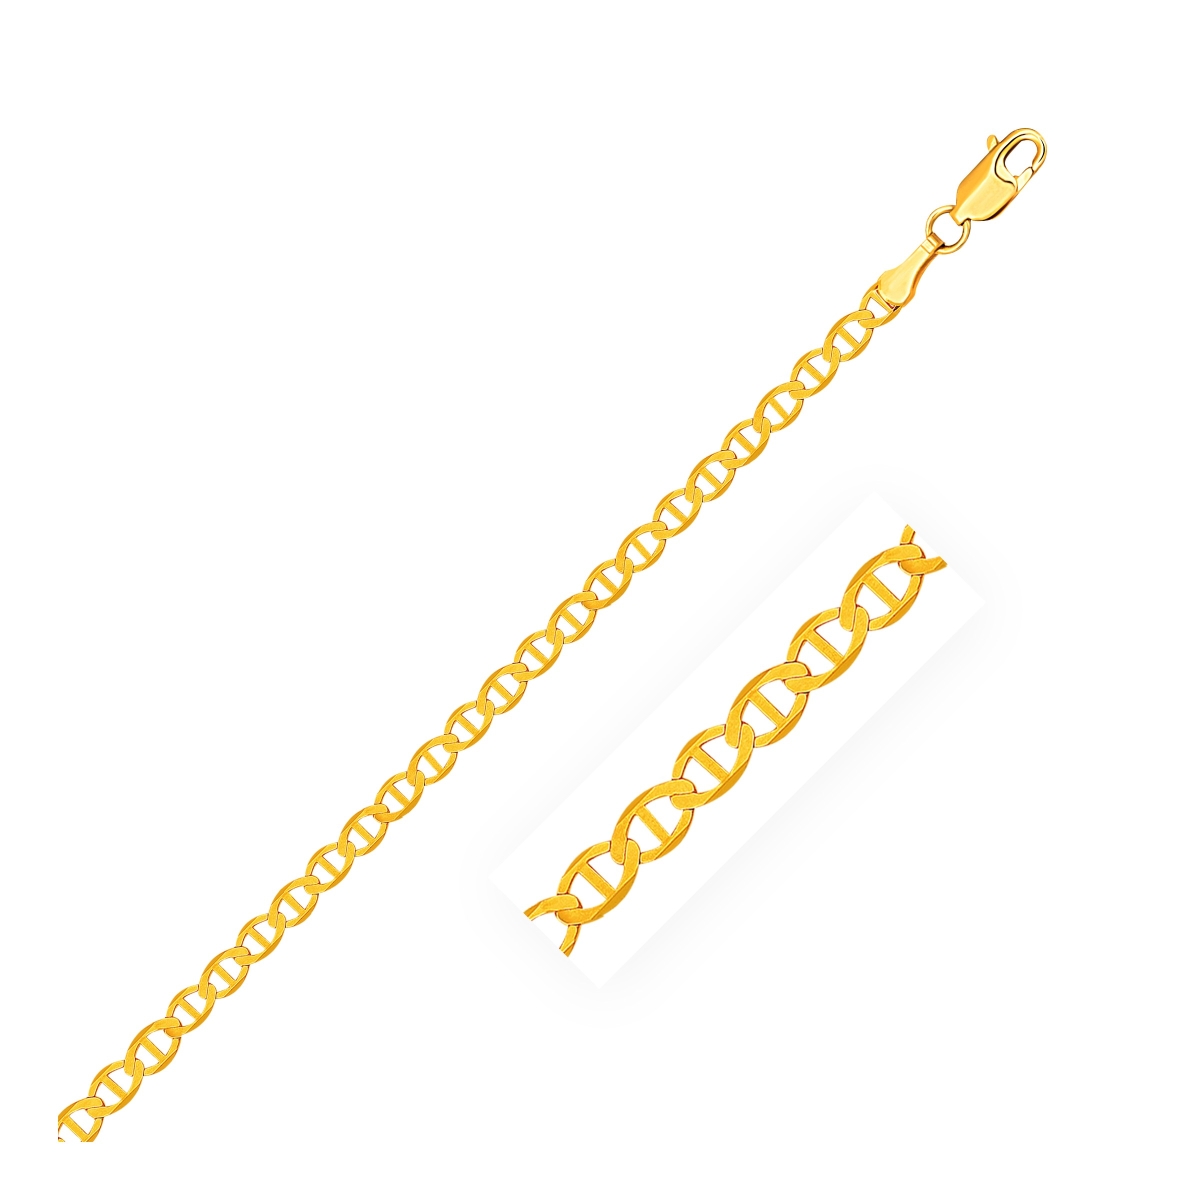 Picture of Iconic Jewels D110598-10 3.2 mm 14k Yellow Gold Mariner Link Anklet - Size 10 in.